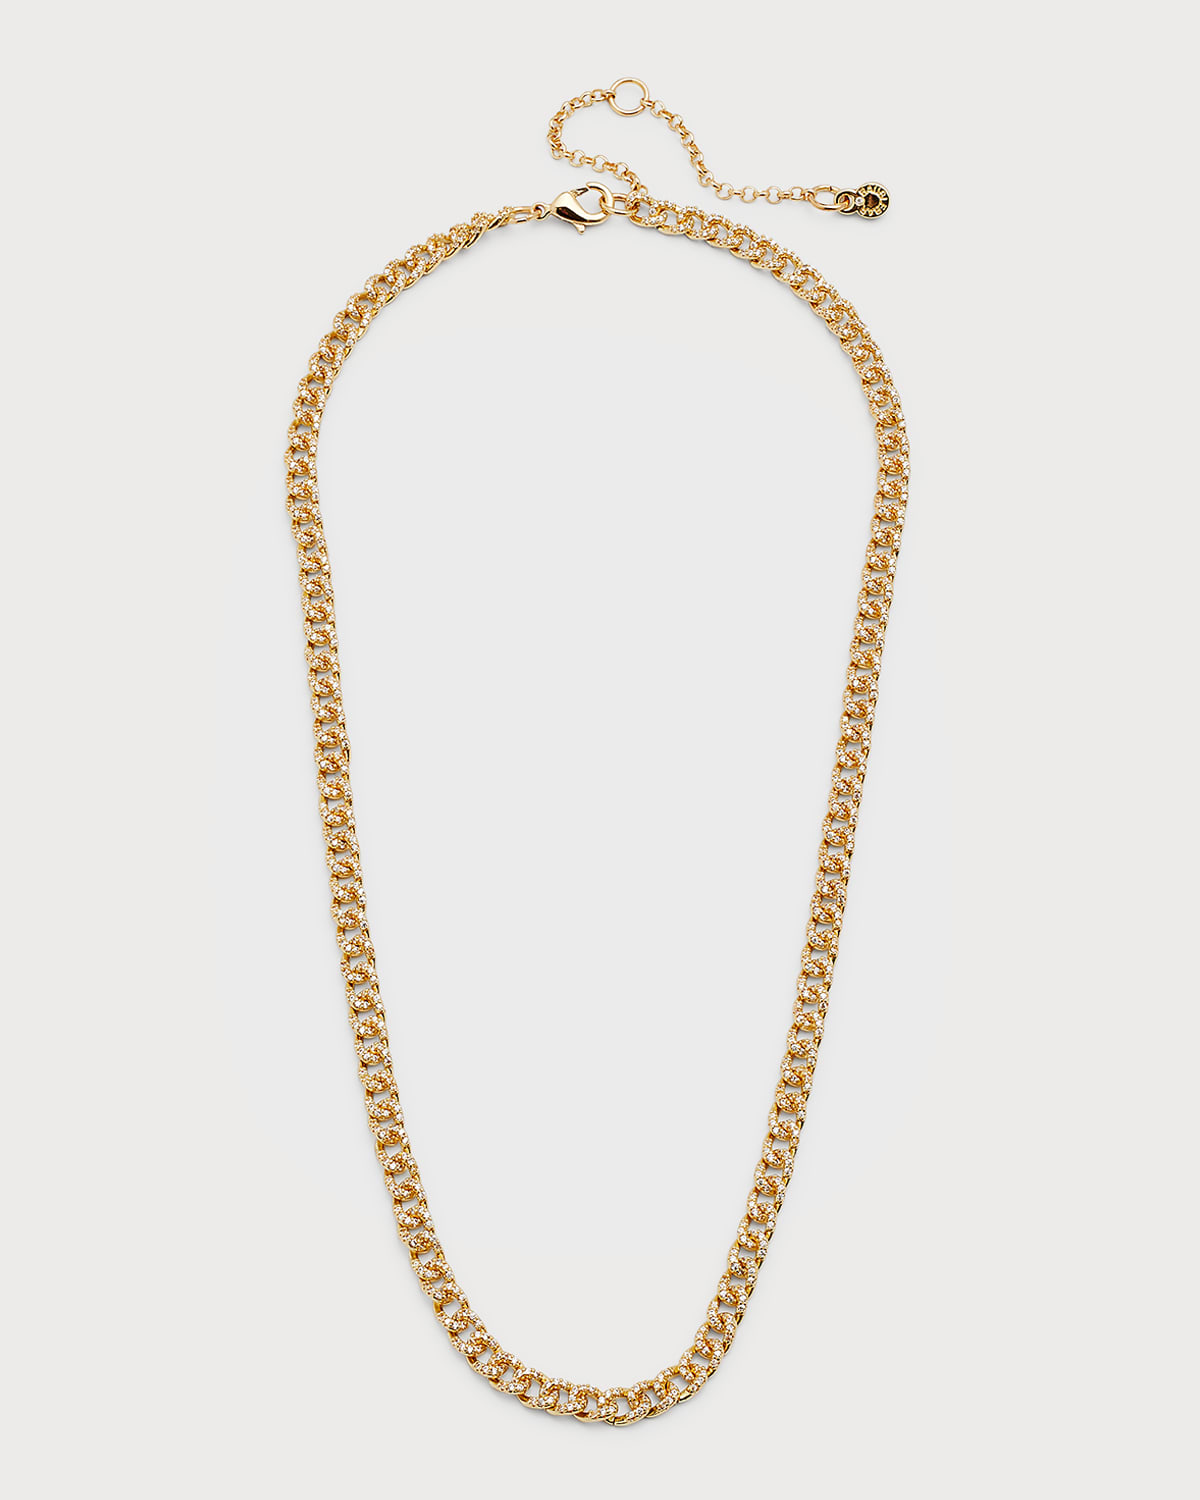 Baublebar Tamira Pave Curb Link Necklace, 17-20 In Gold